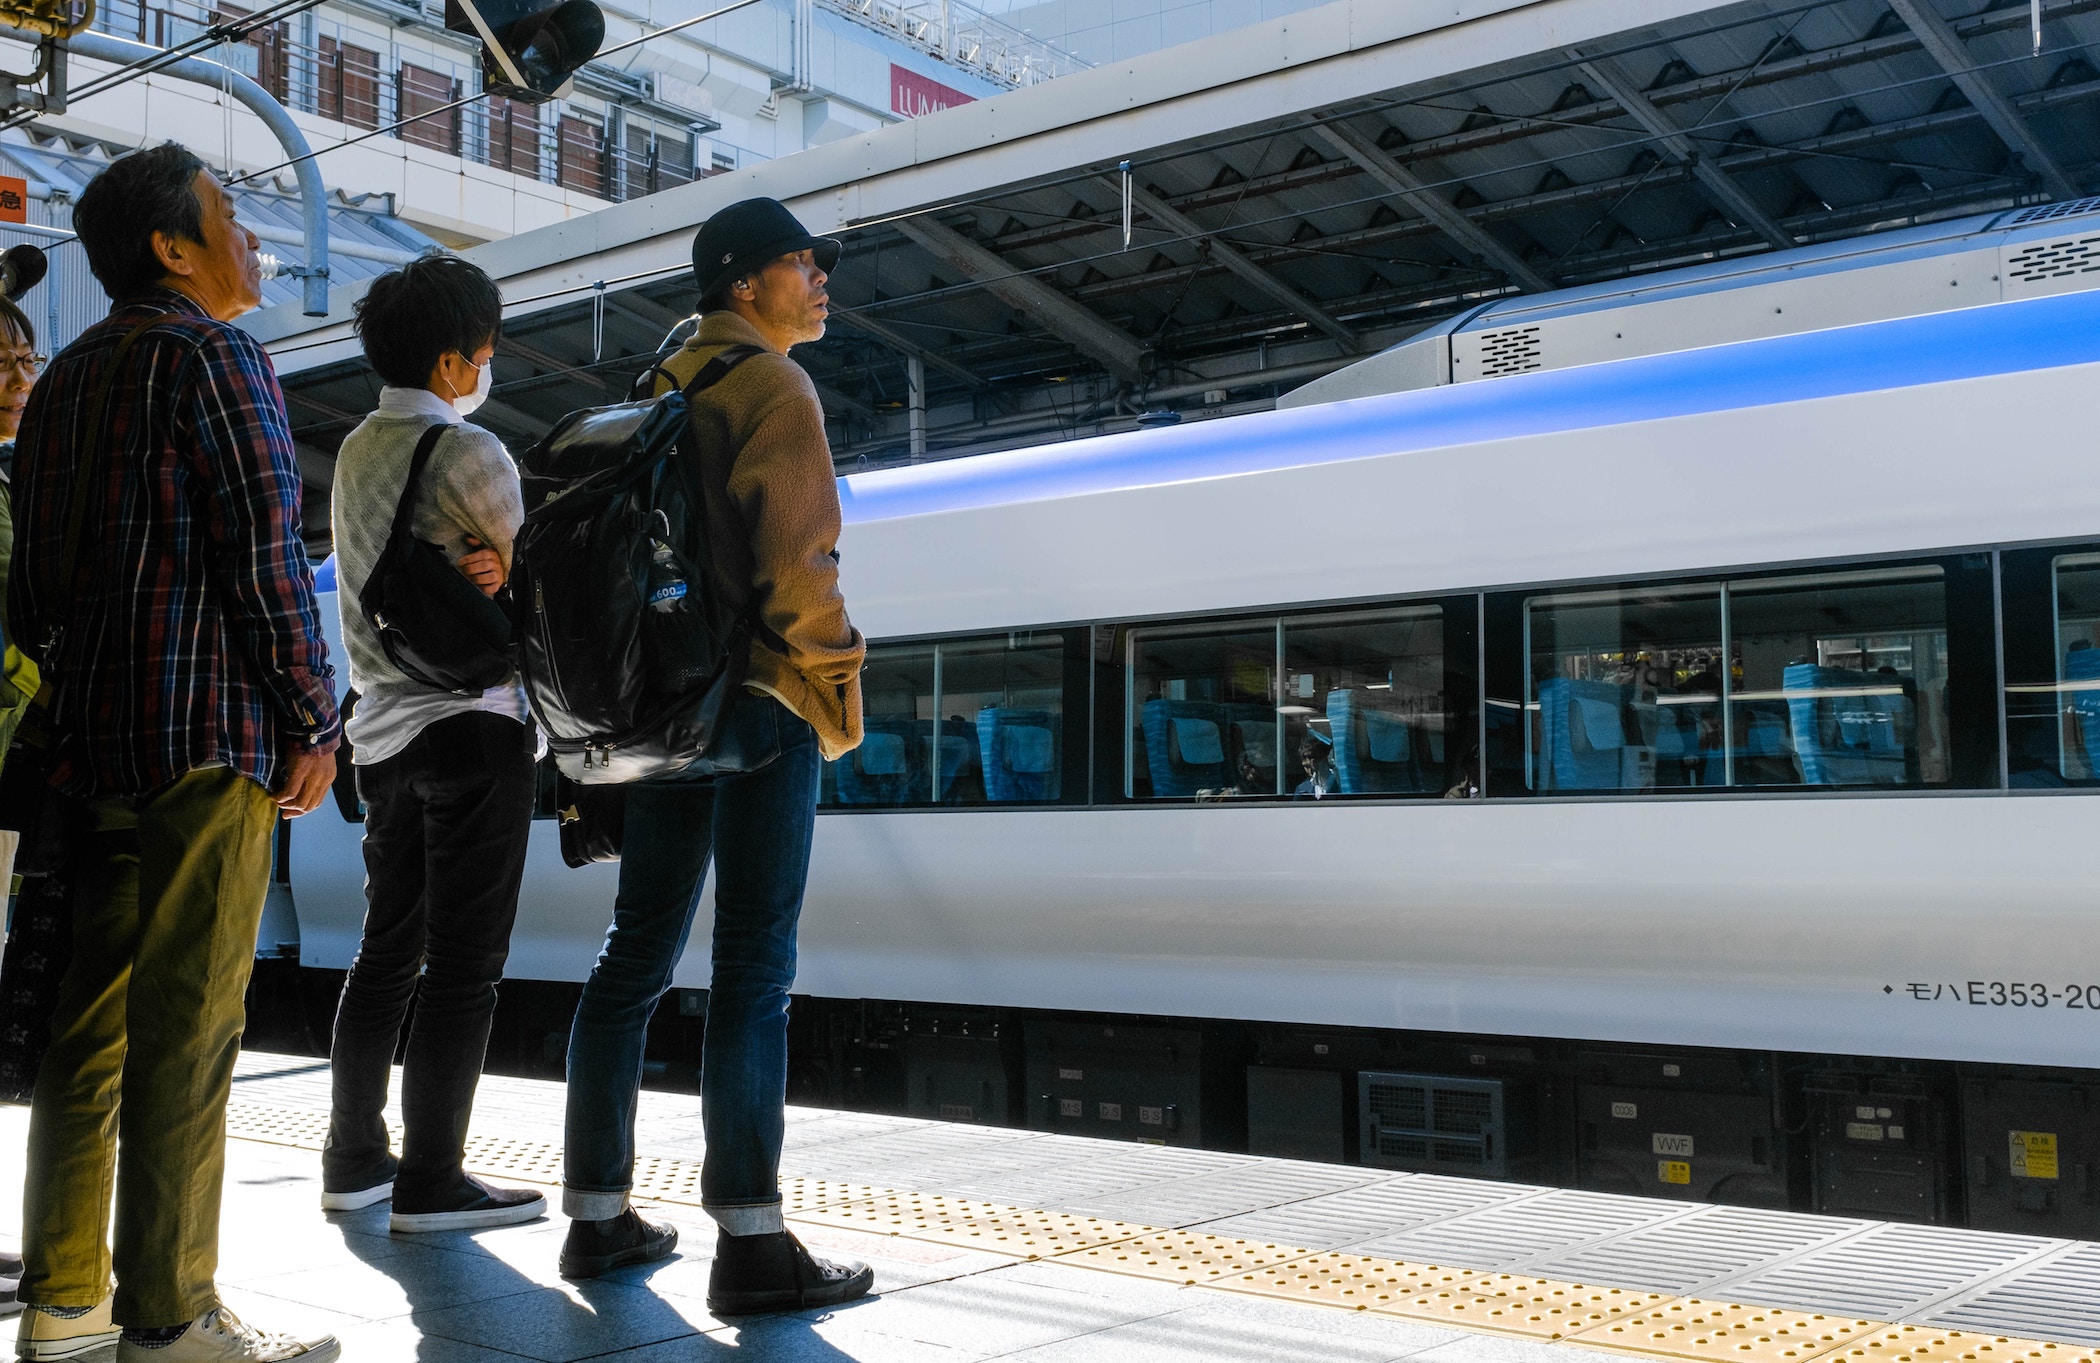 Japan bullet train station | Cities with high-speed rail lines offer greater economic power to homebuyers and renters, greater affordability for lower-wage workers